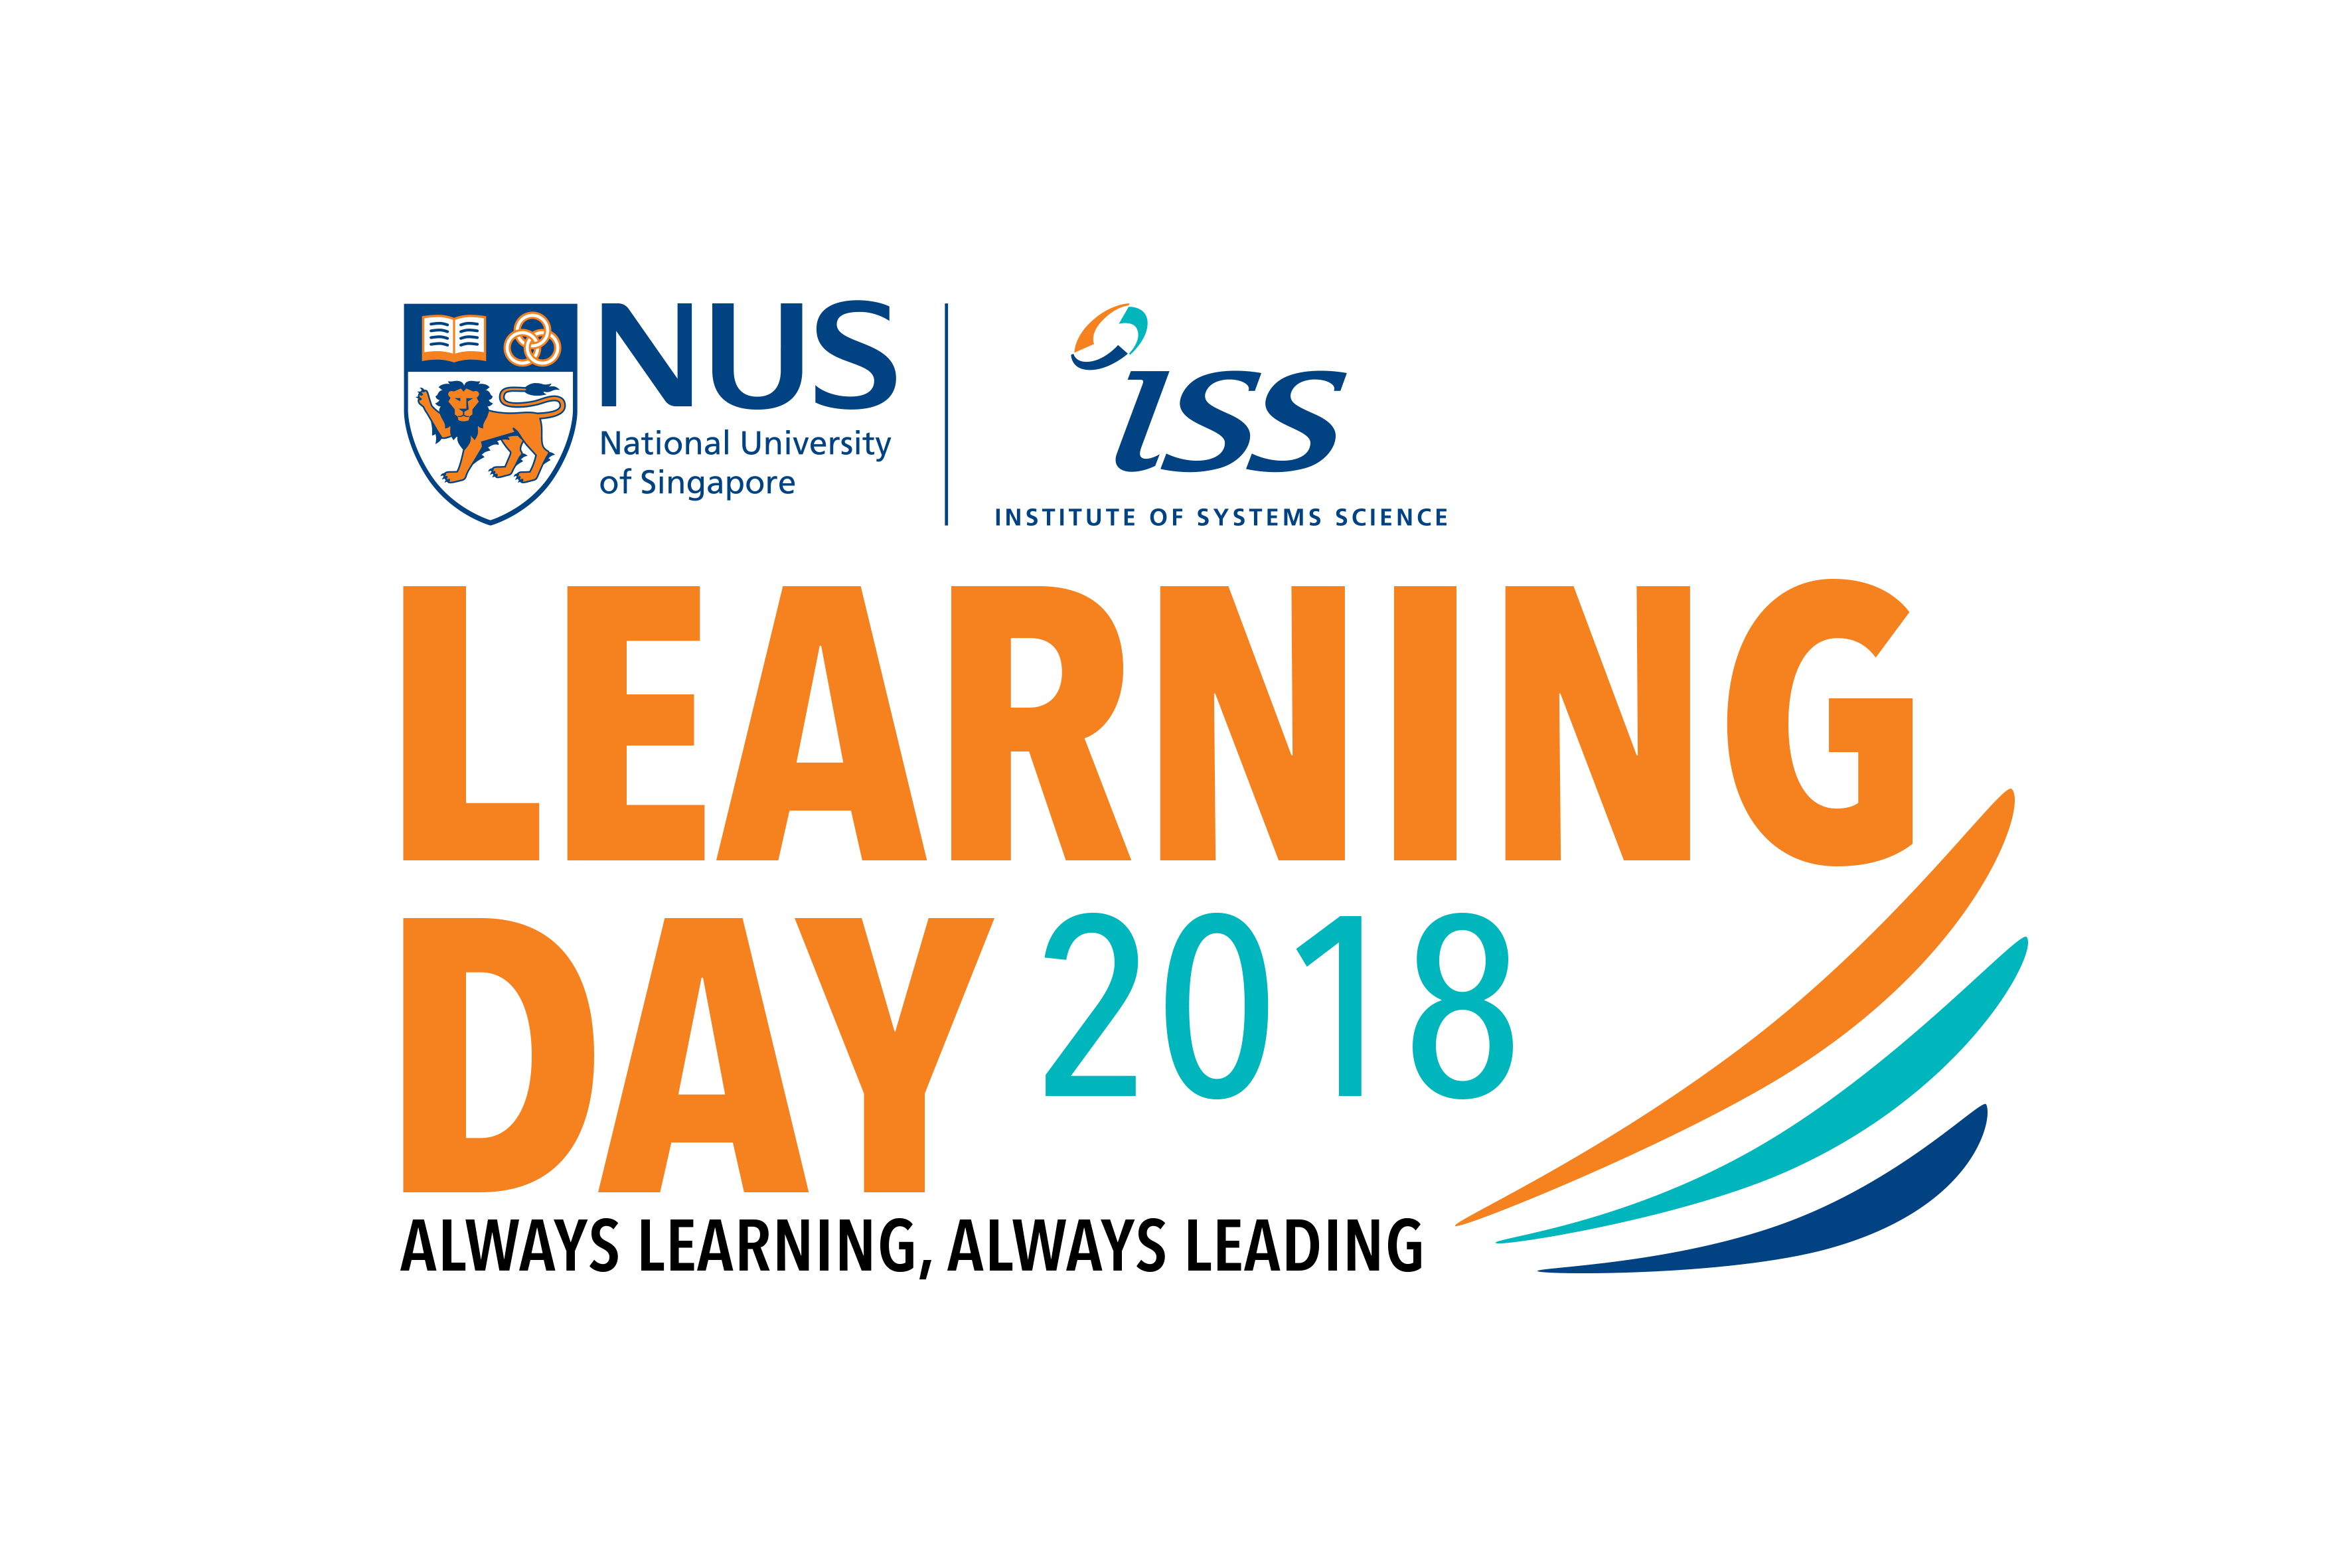 NUS-ISS Learning Day 2018